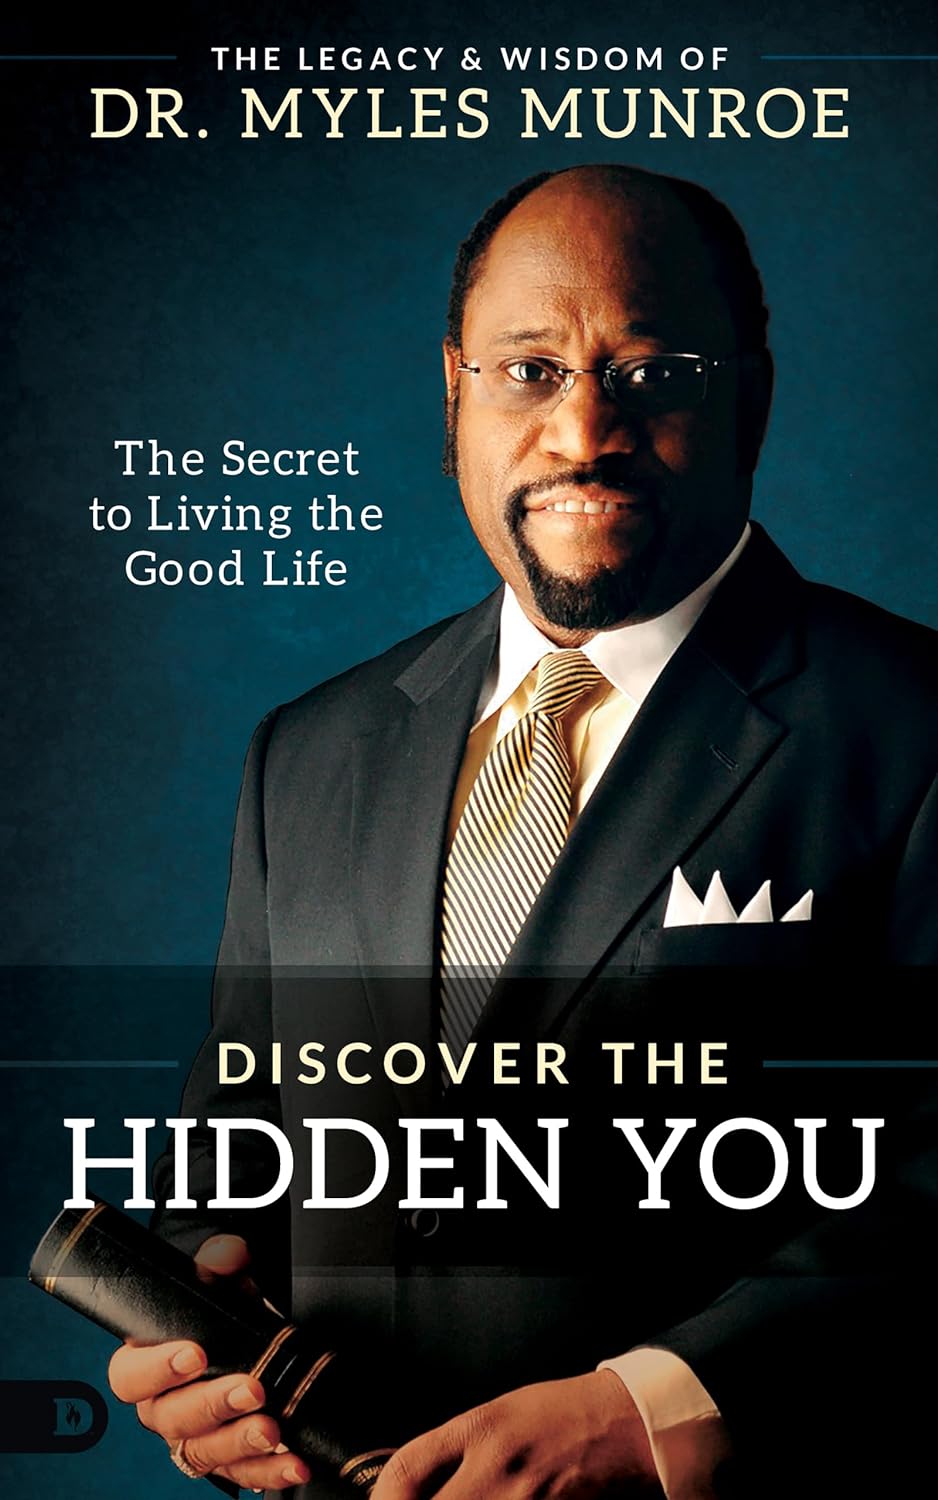 Discover the Hidden You - Dr. Myles Munroe